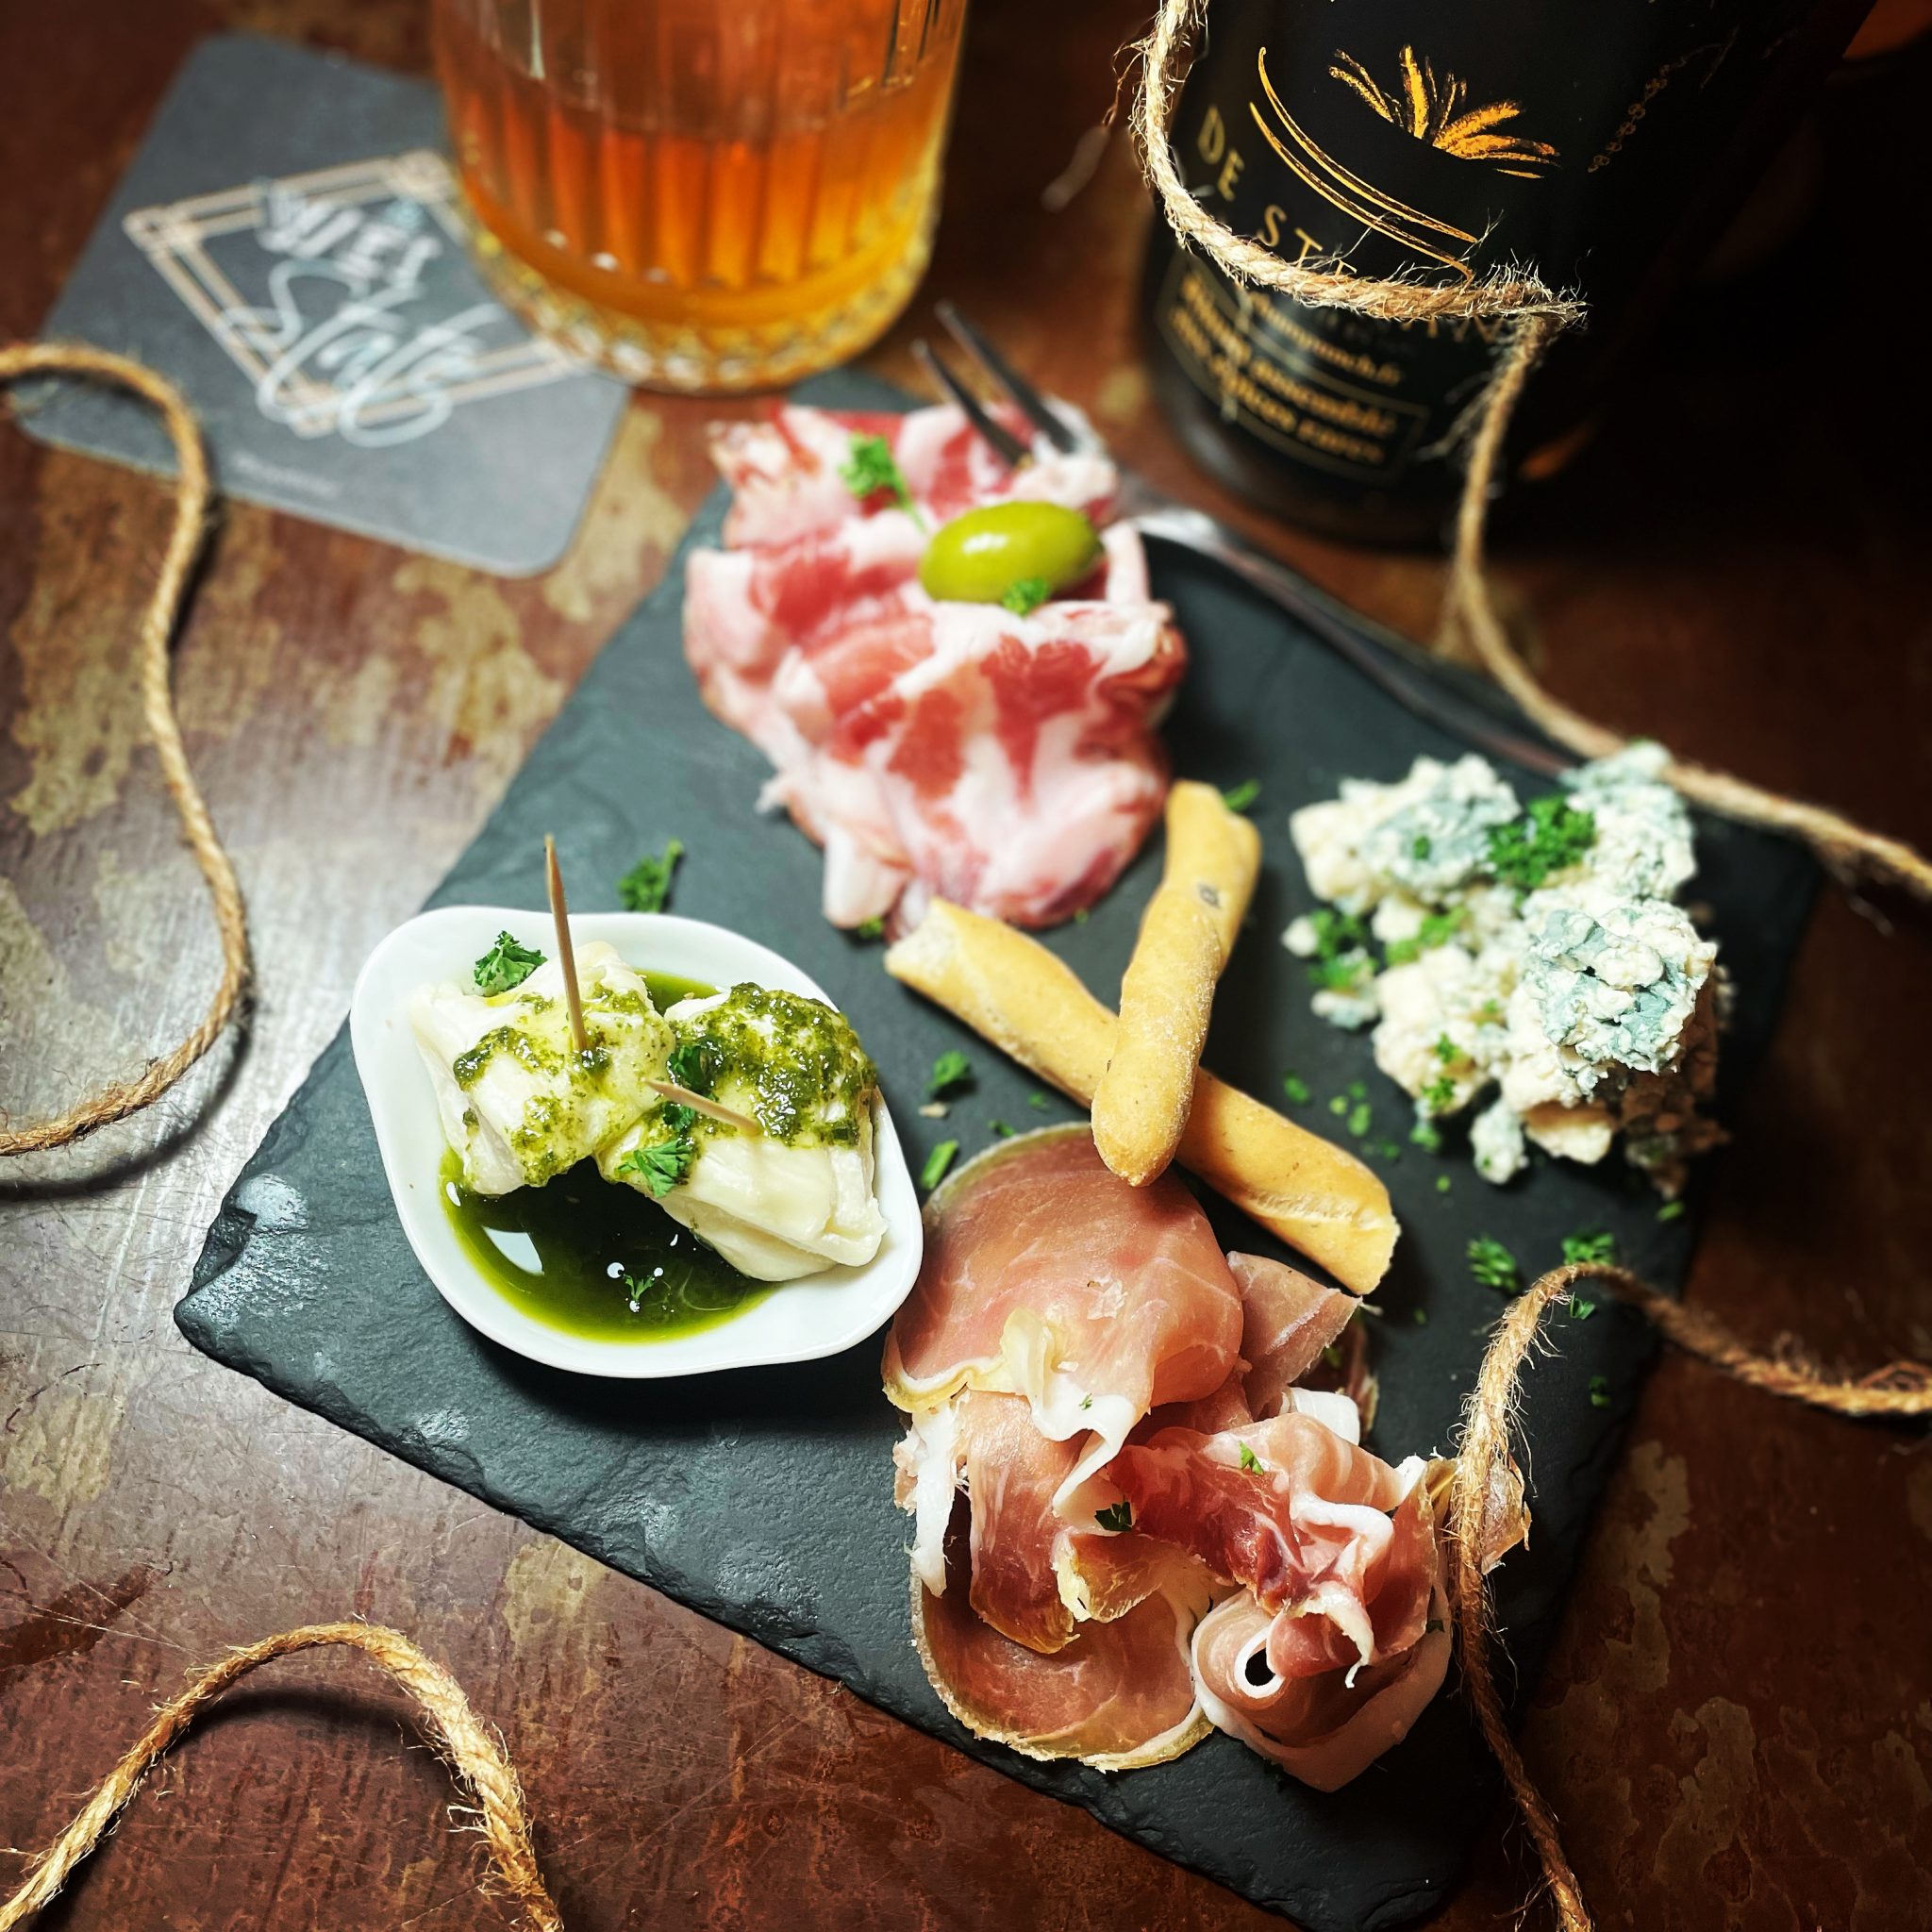 Ardoise Charcuterie & Fromage